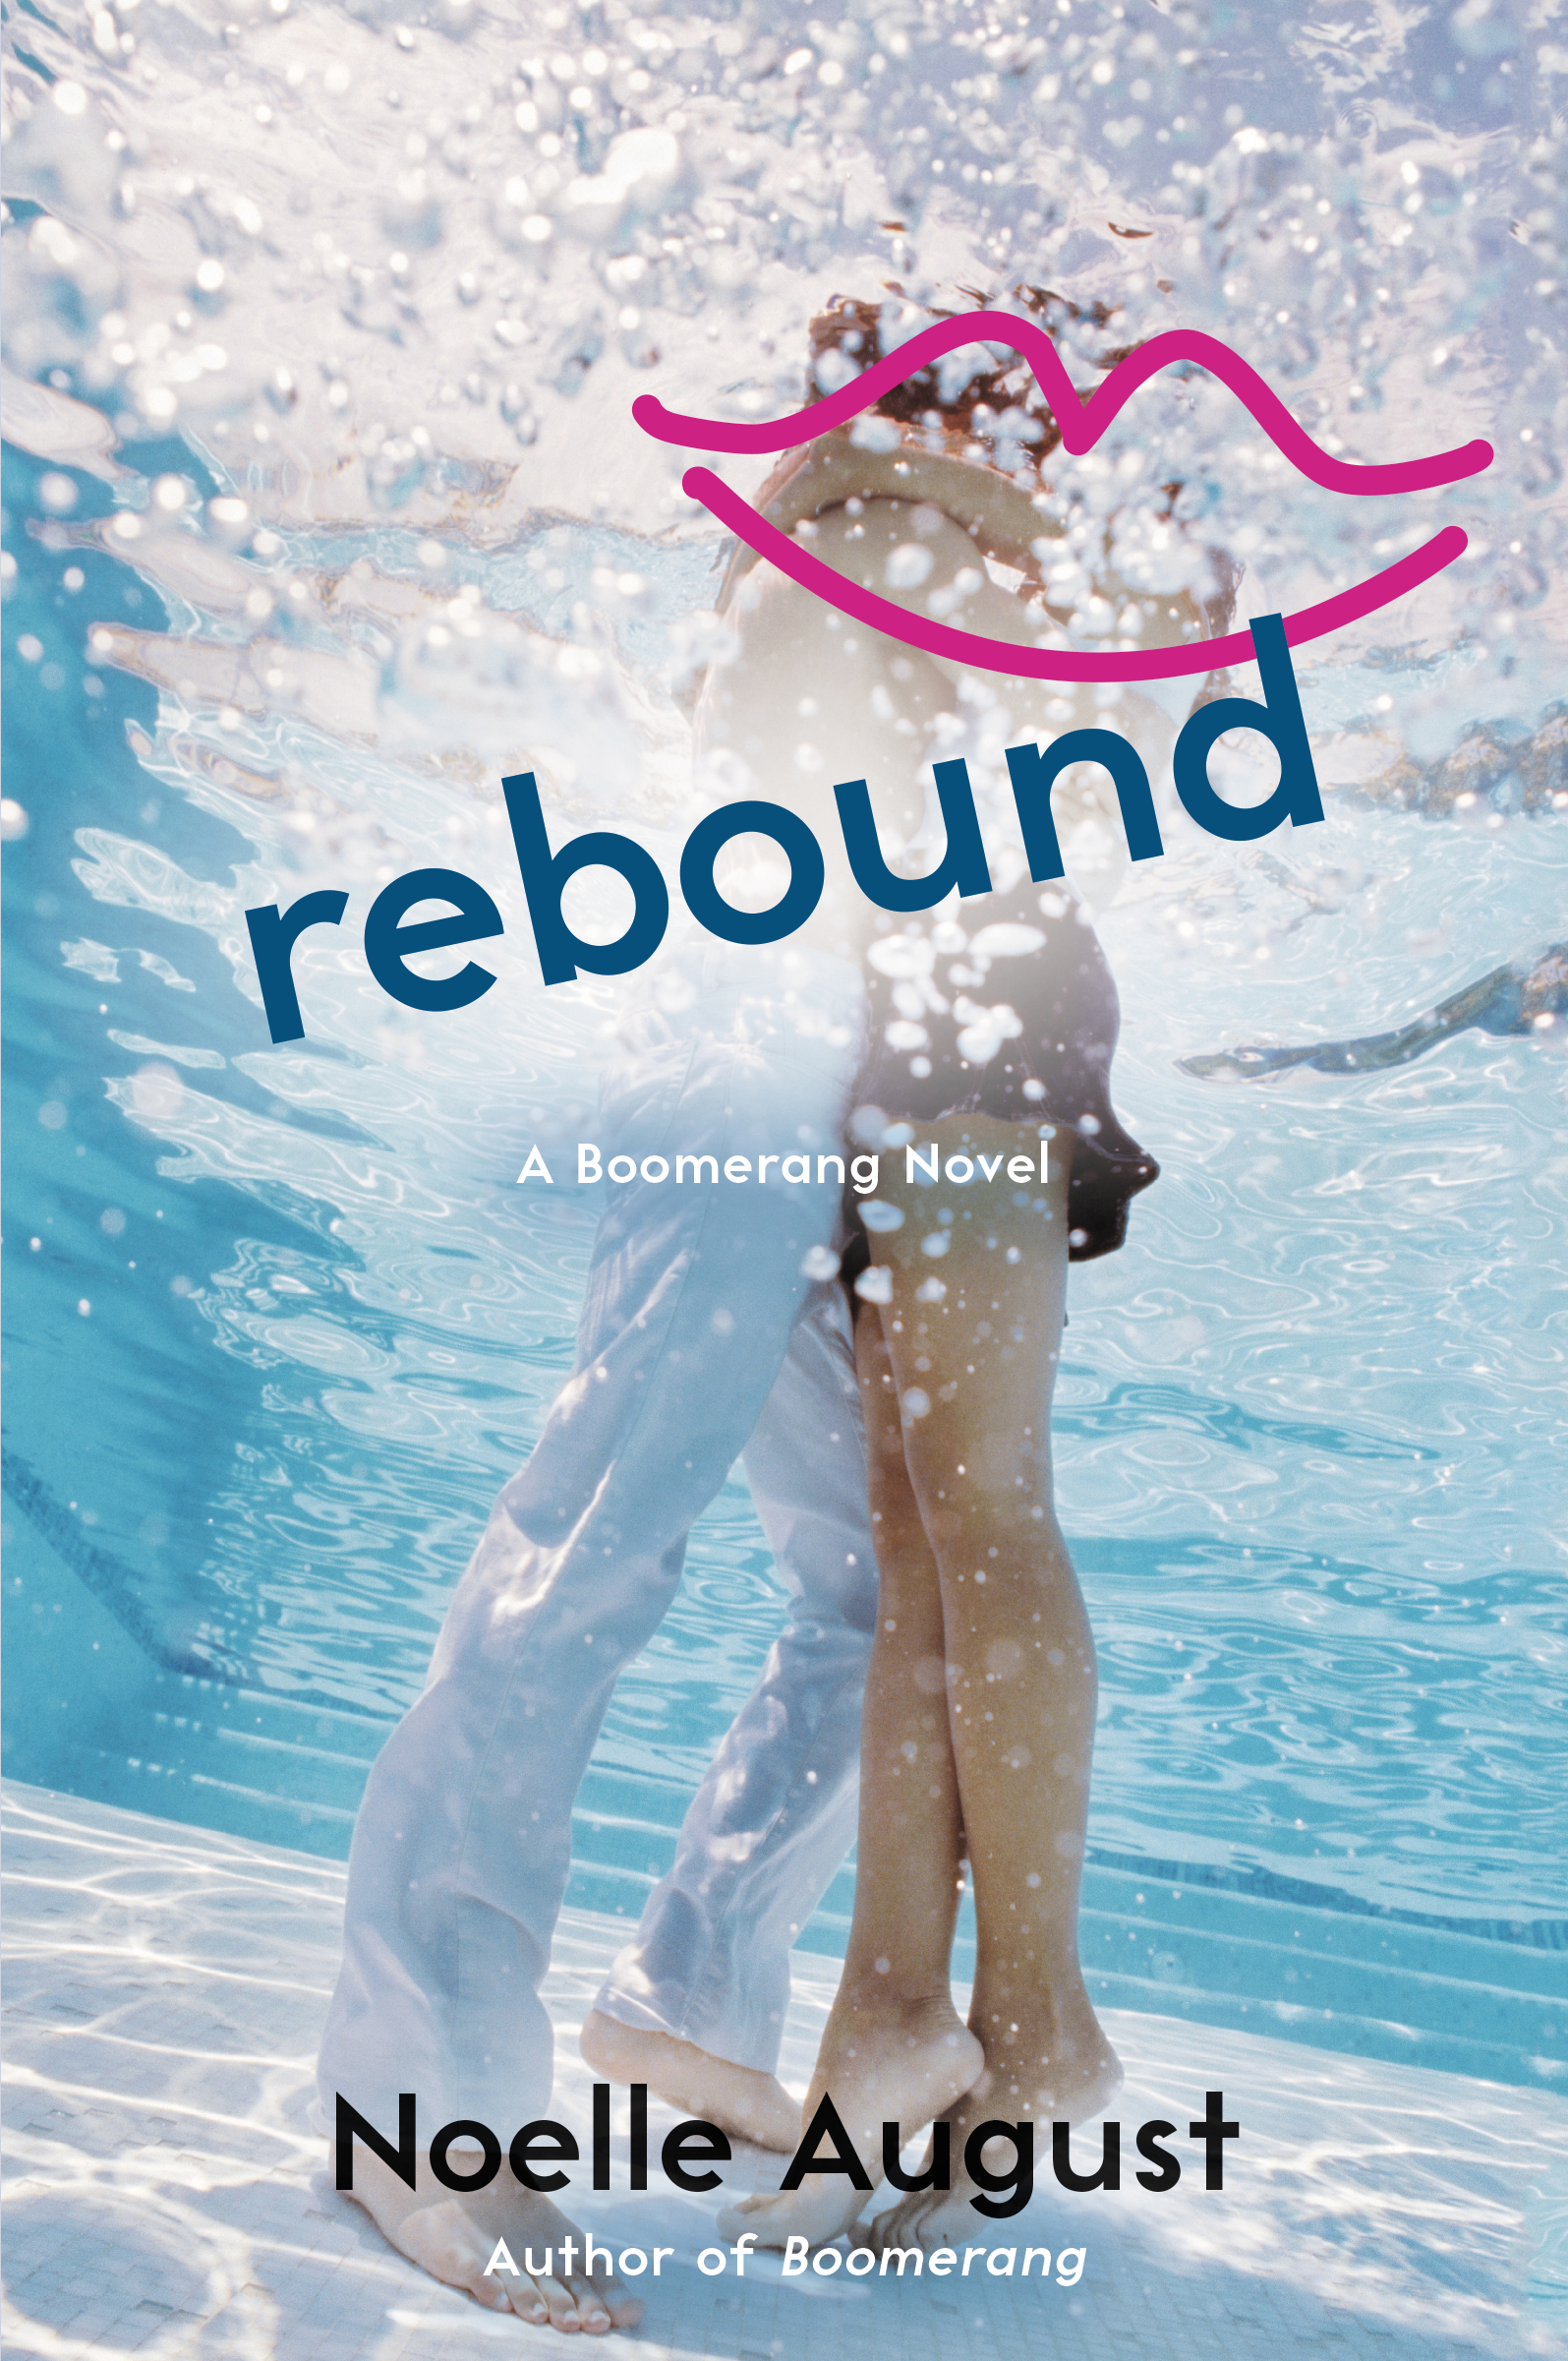 BLOG TOUR: Rebound by Noelle August + Giveaway